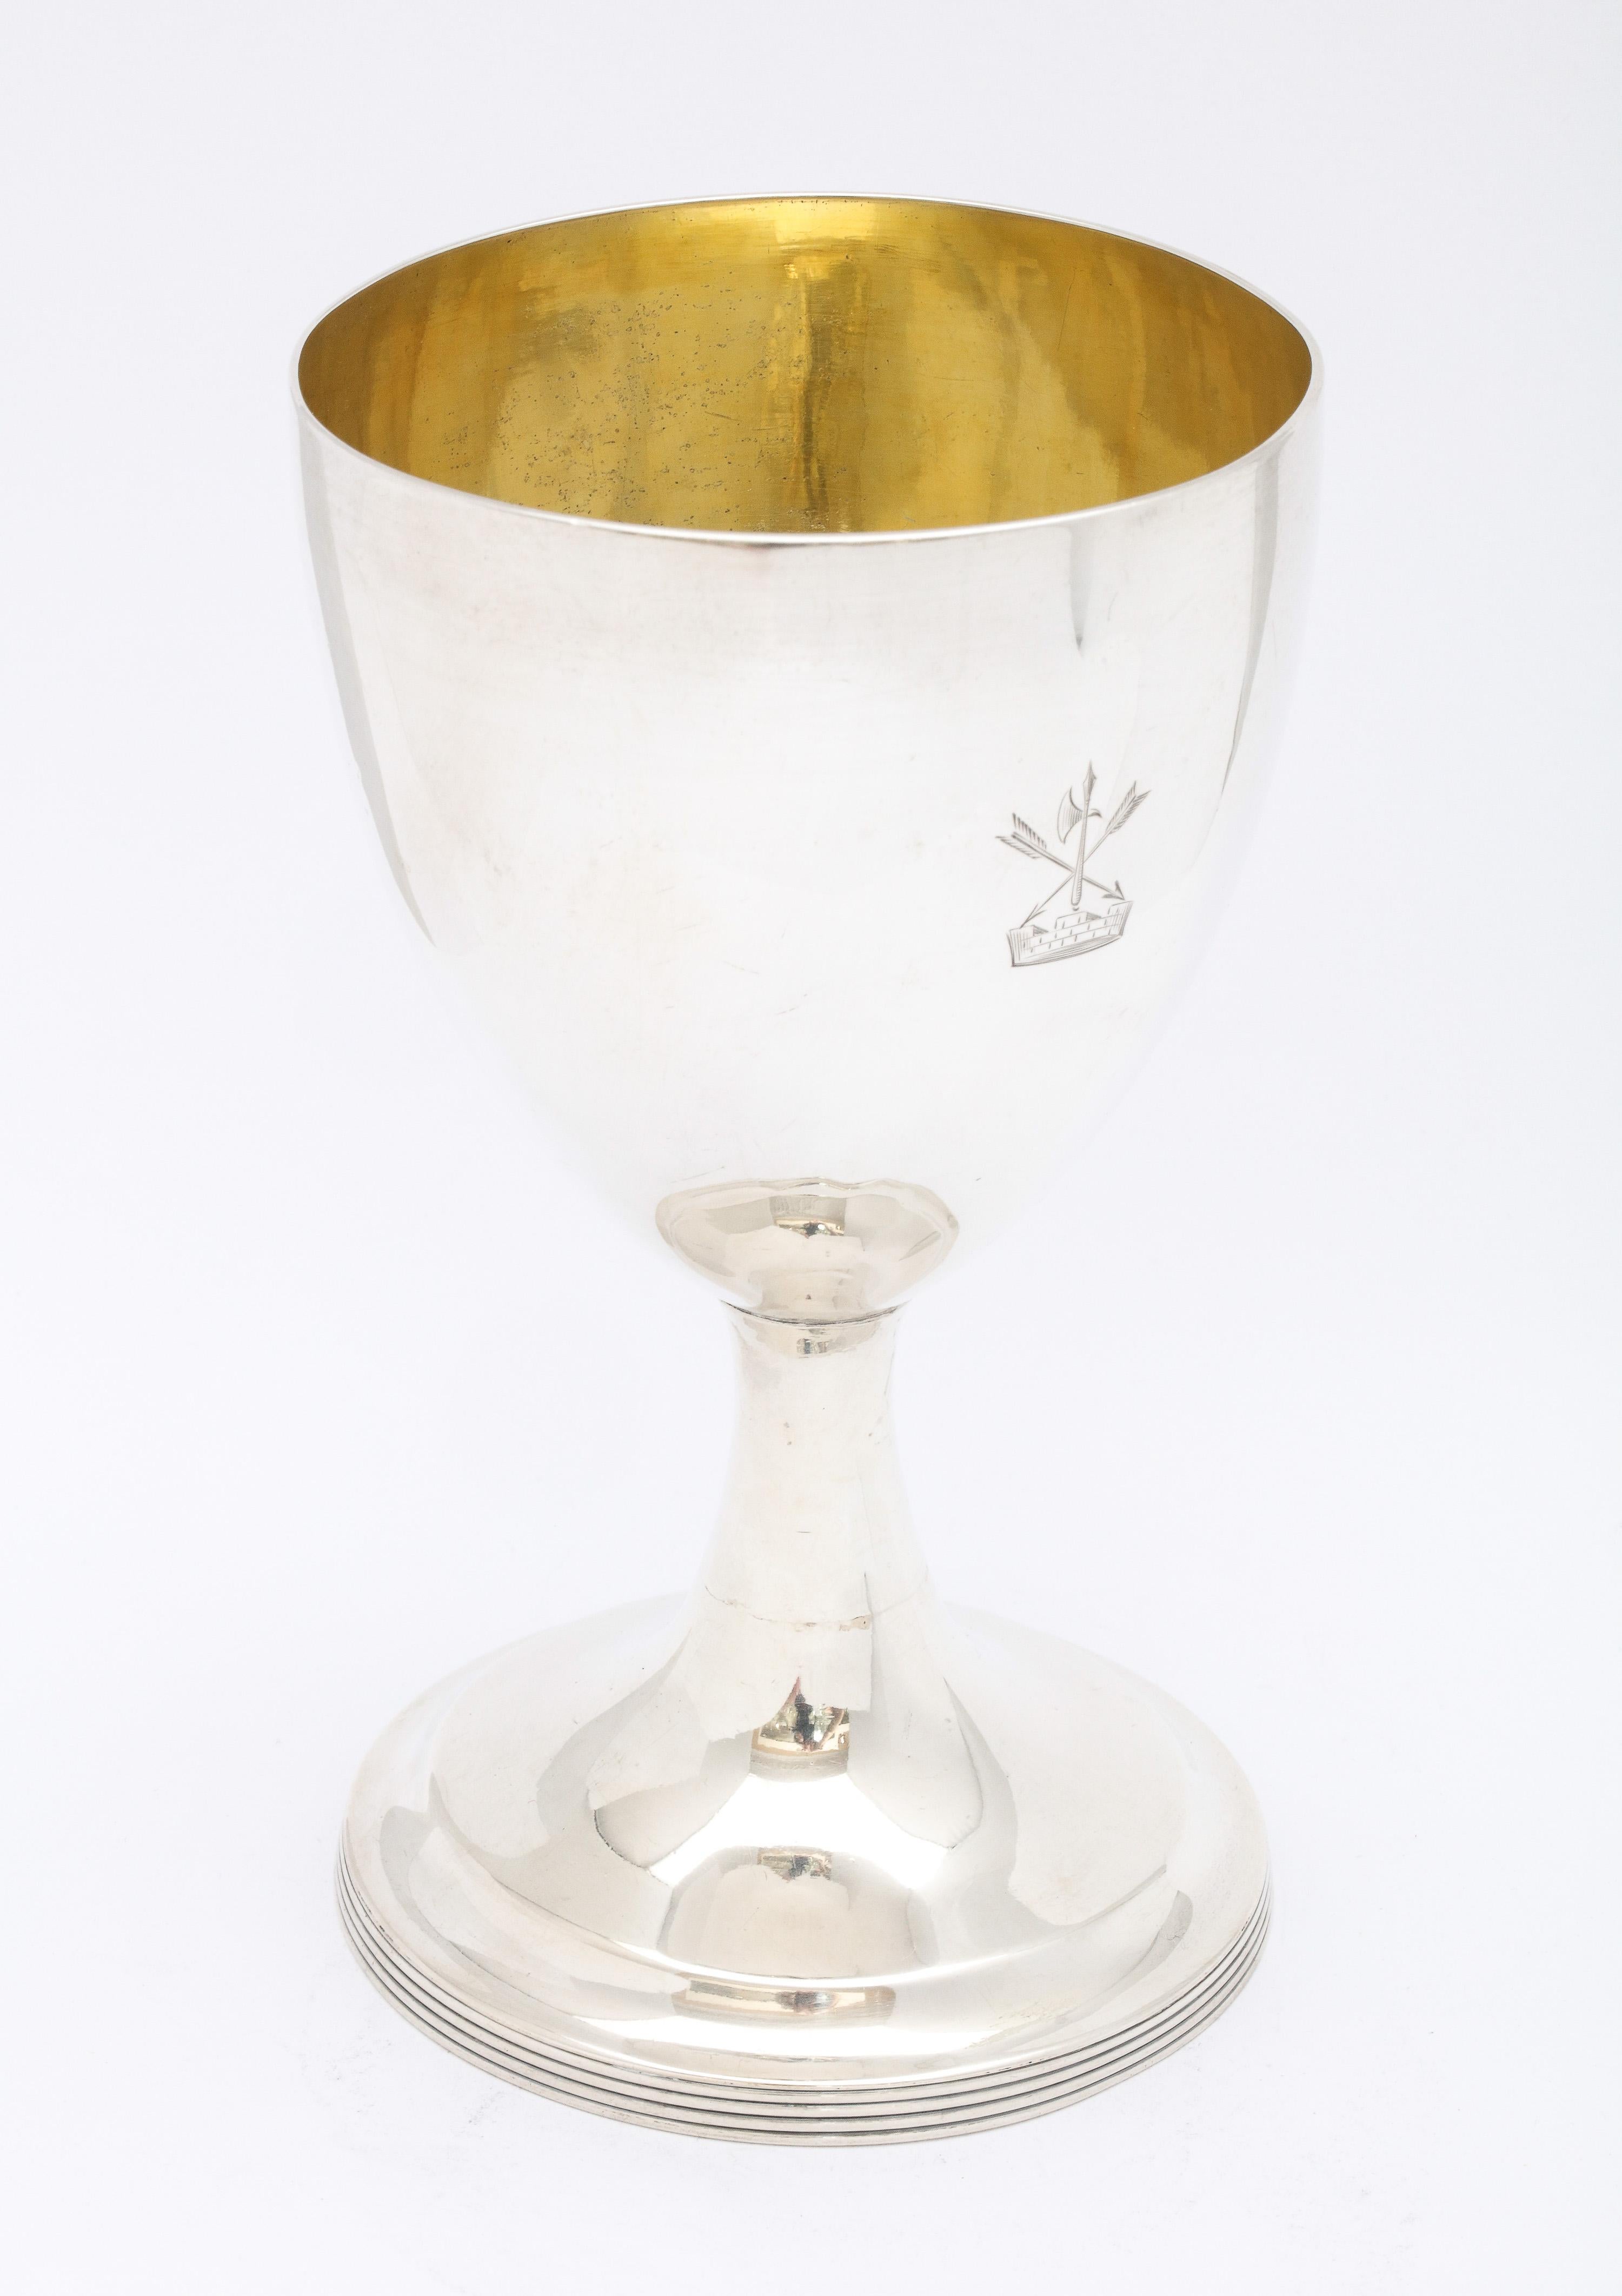 Georgian (George III), sterling silver goblet, Dublin, year - hallmarked for 1792, Joseph Jackson - maker. Measures 6 inches high x 3 1/2 inches diameter across opening x 3 1/2 inches diameter across base. Interior is gilded. Weighs 7.130 troy